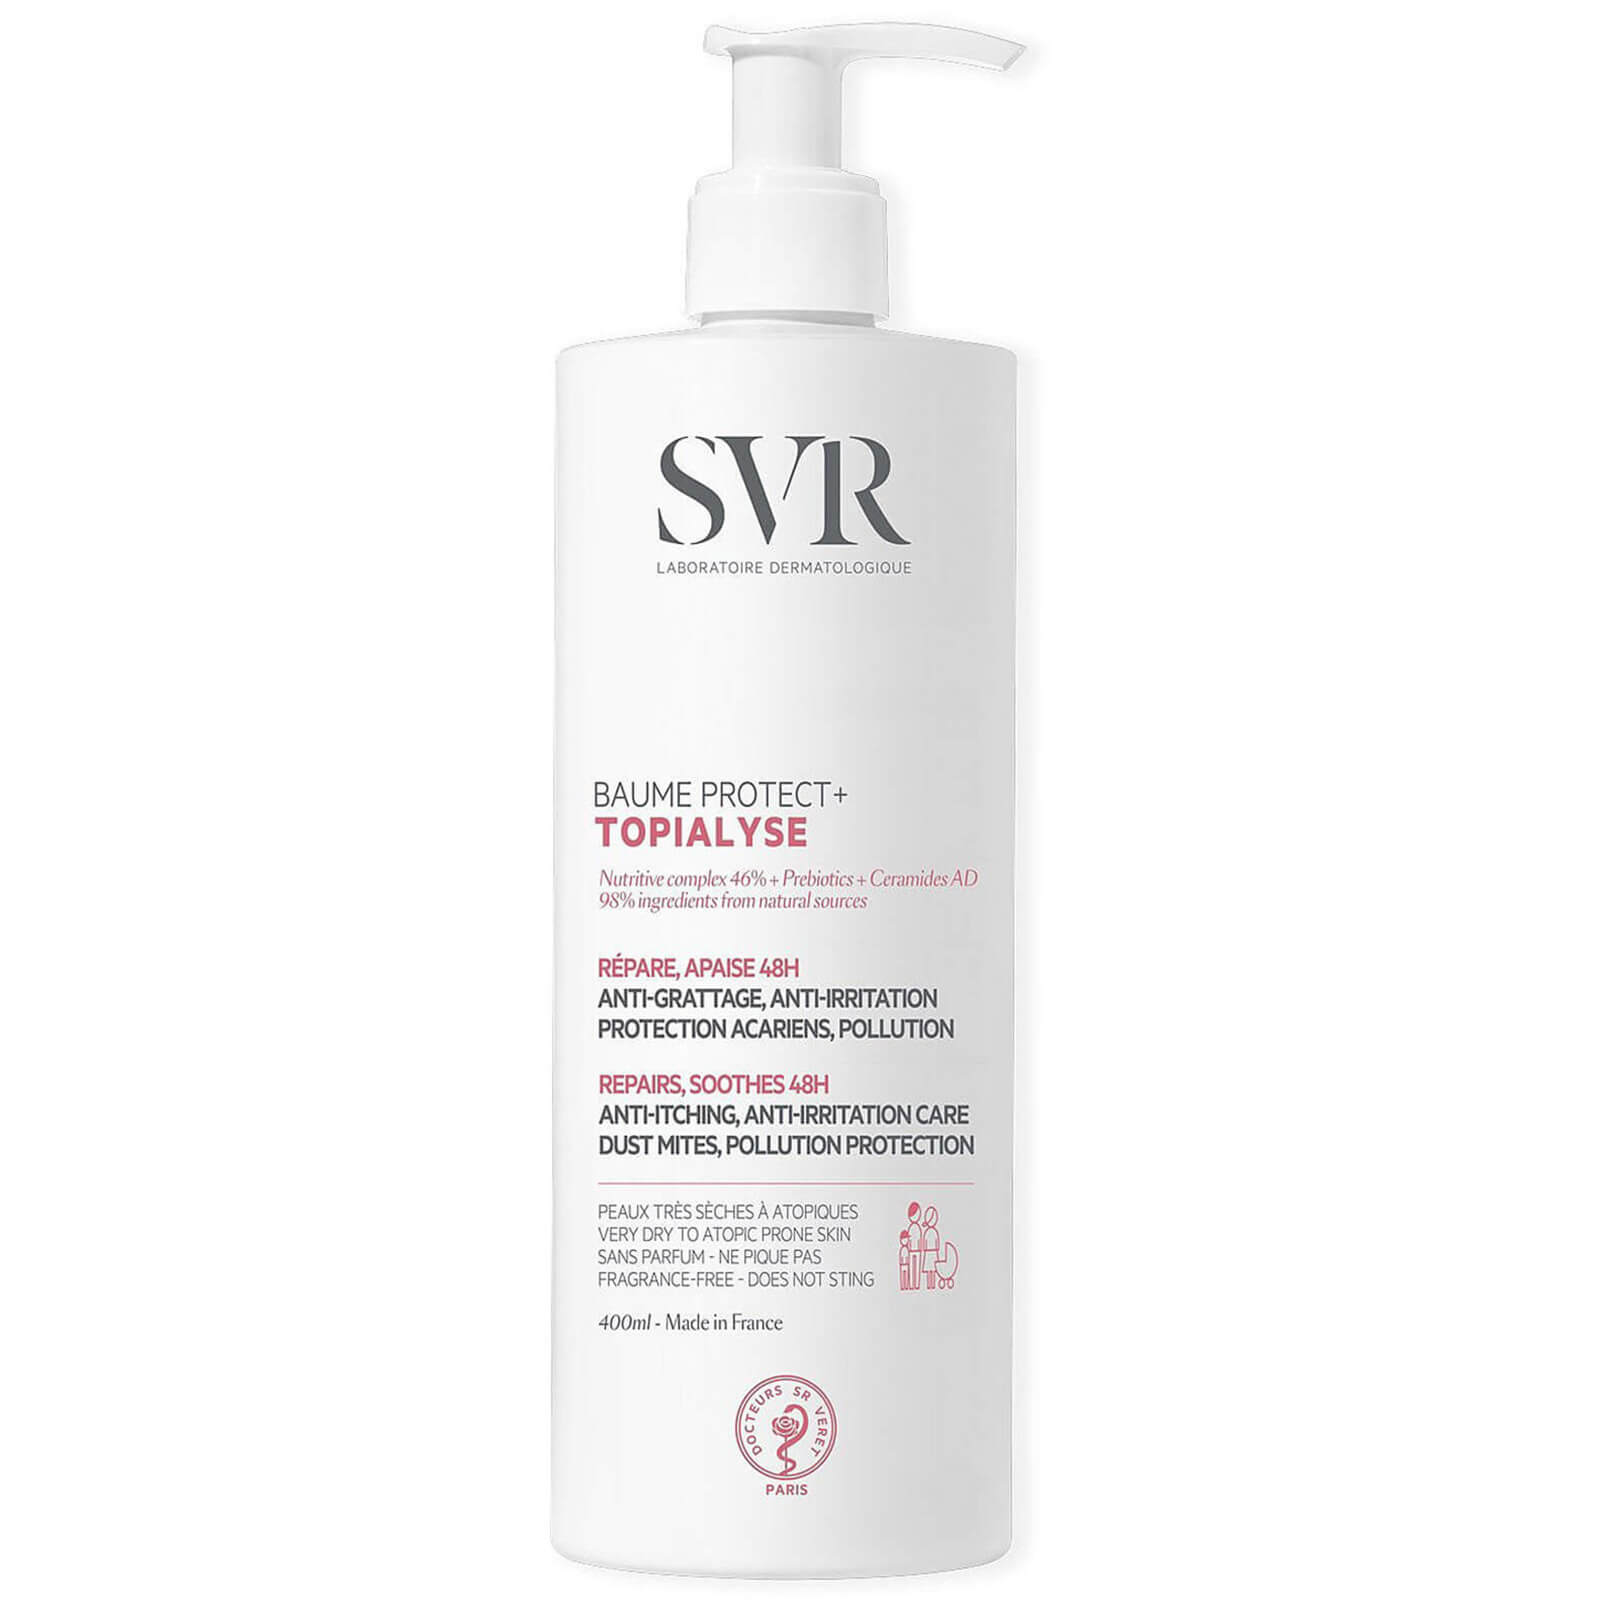 Photos - Cream / Lotion SVR Topialyse Protect+ Soothing and Moisturising Intensive Balm 400ml 1002